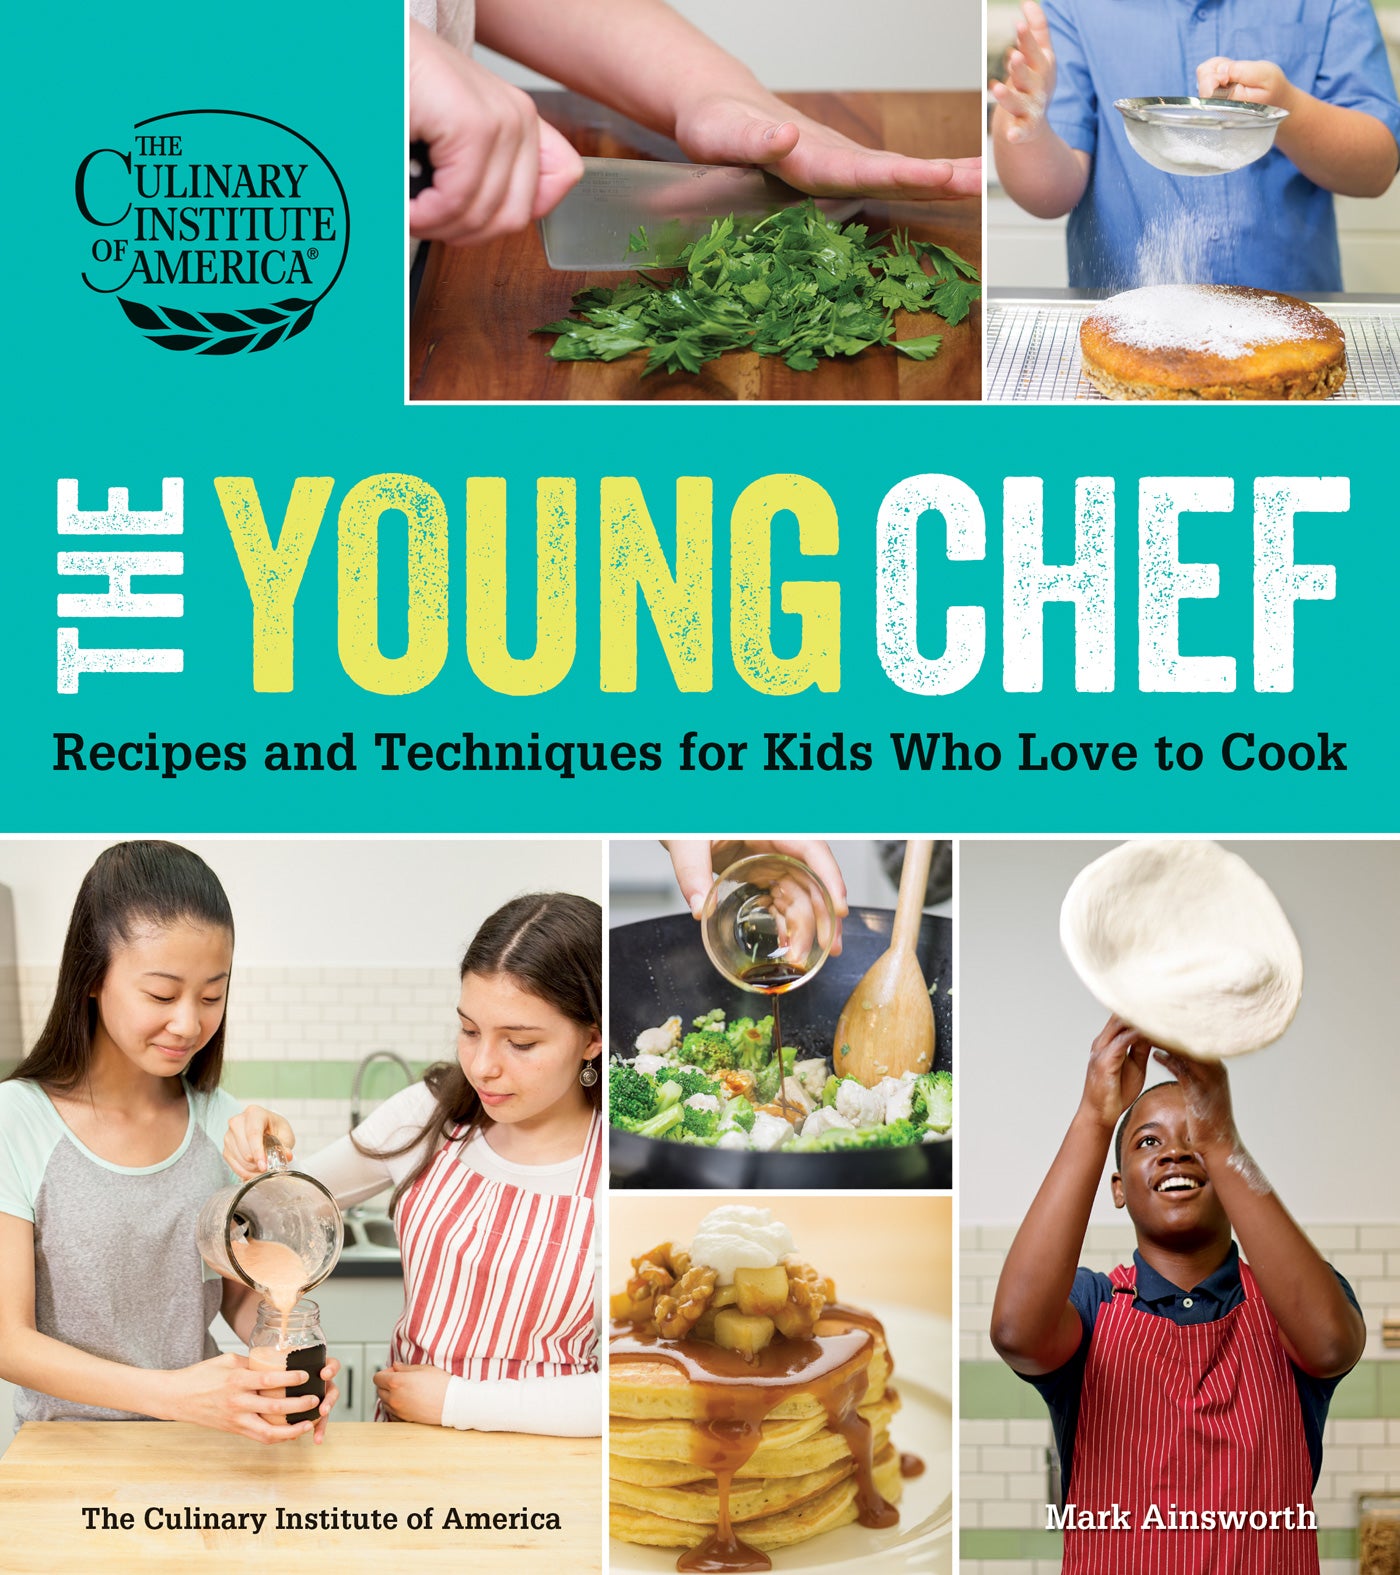 cover of book is blue and has pictures of teens cooking, prepared food, title, and authors name